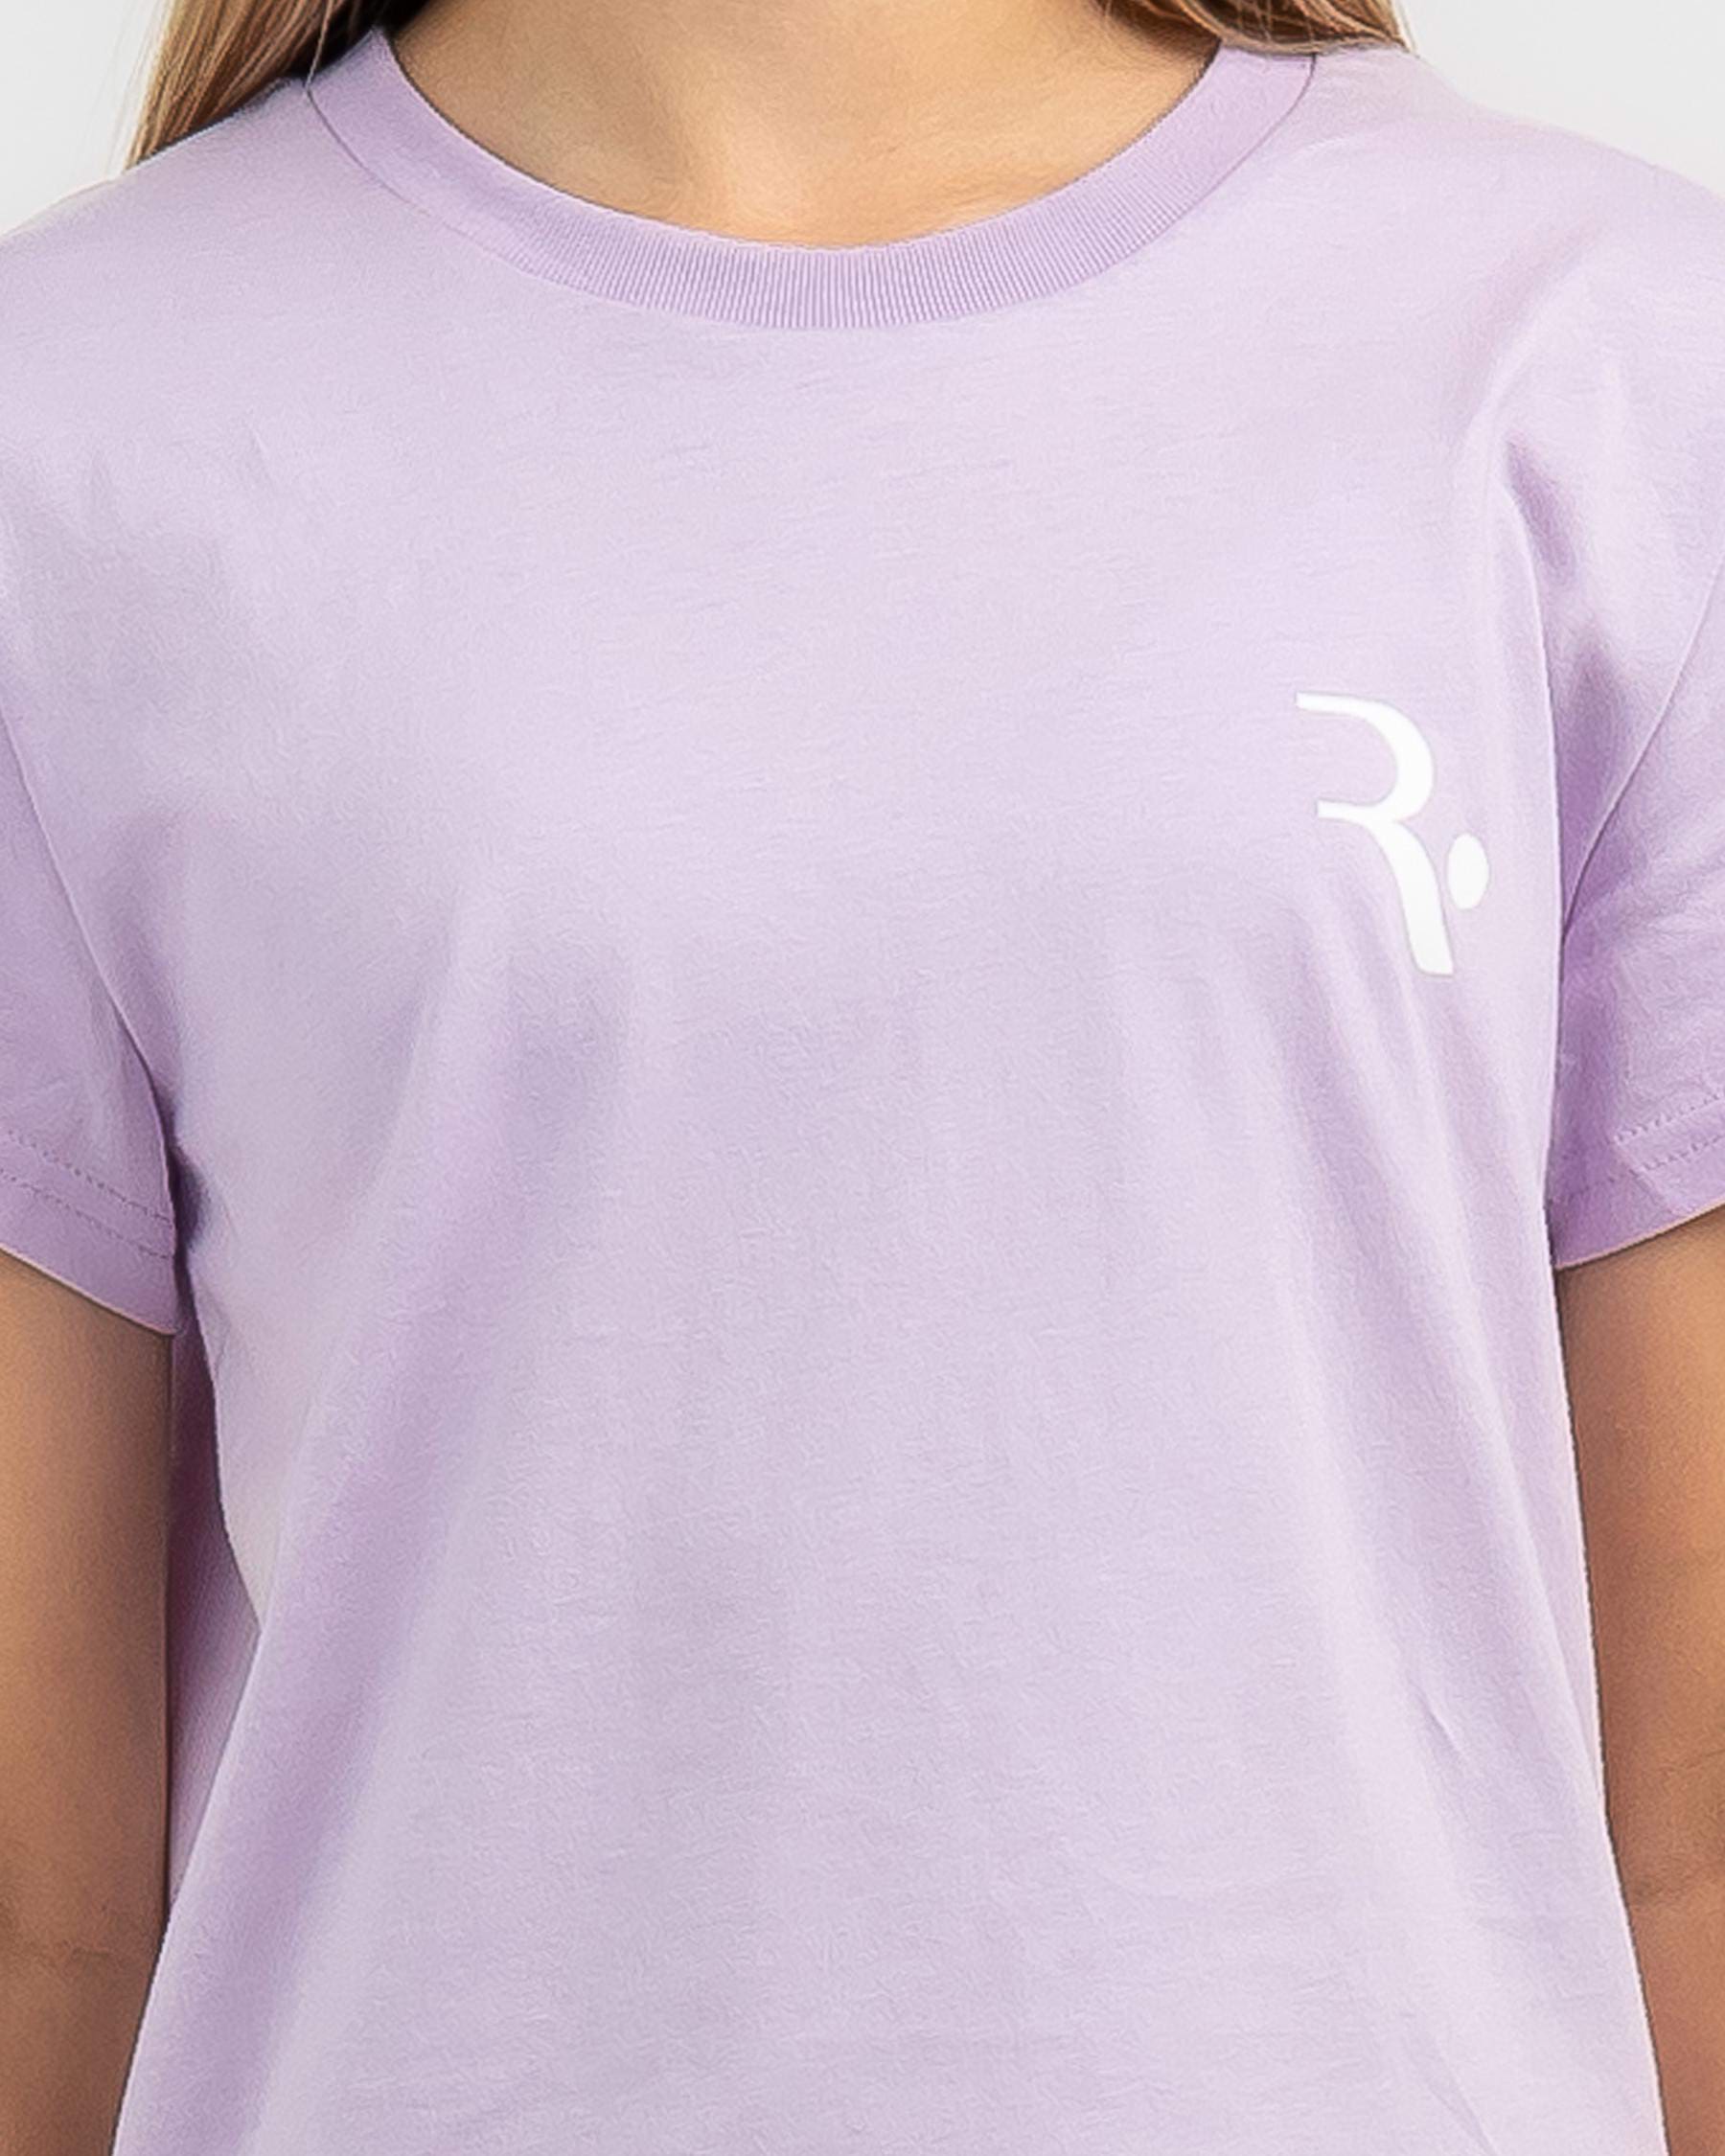 Rusty Girls' Signature Tee Dress In Muted Lavendar - Fast Shipping ...